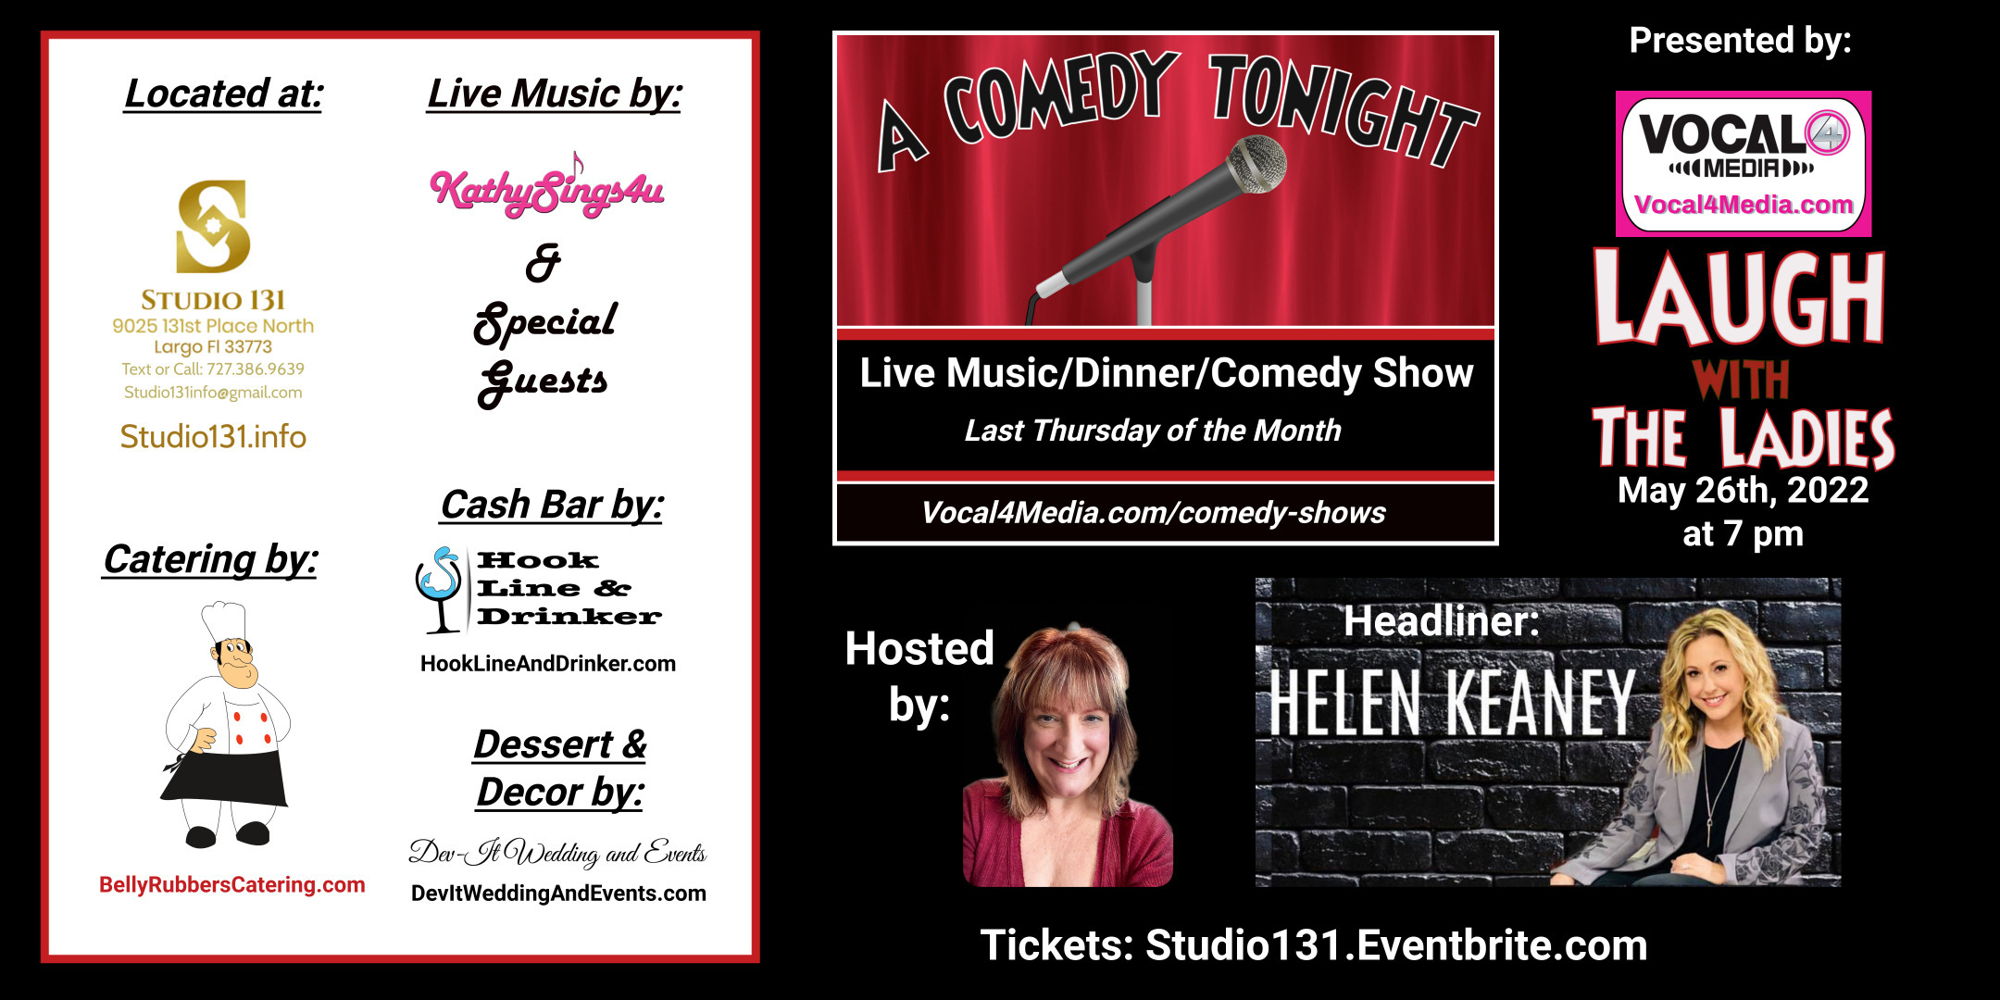 A Comedy Tonight with Helen Keaney and Host Tara Zimmerman promotional image